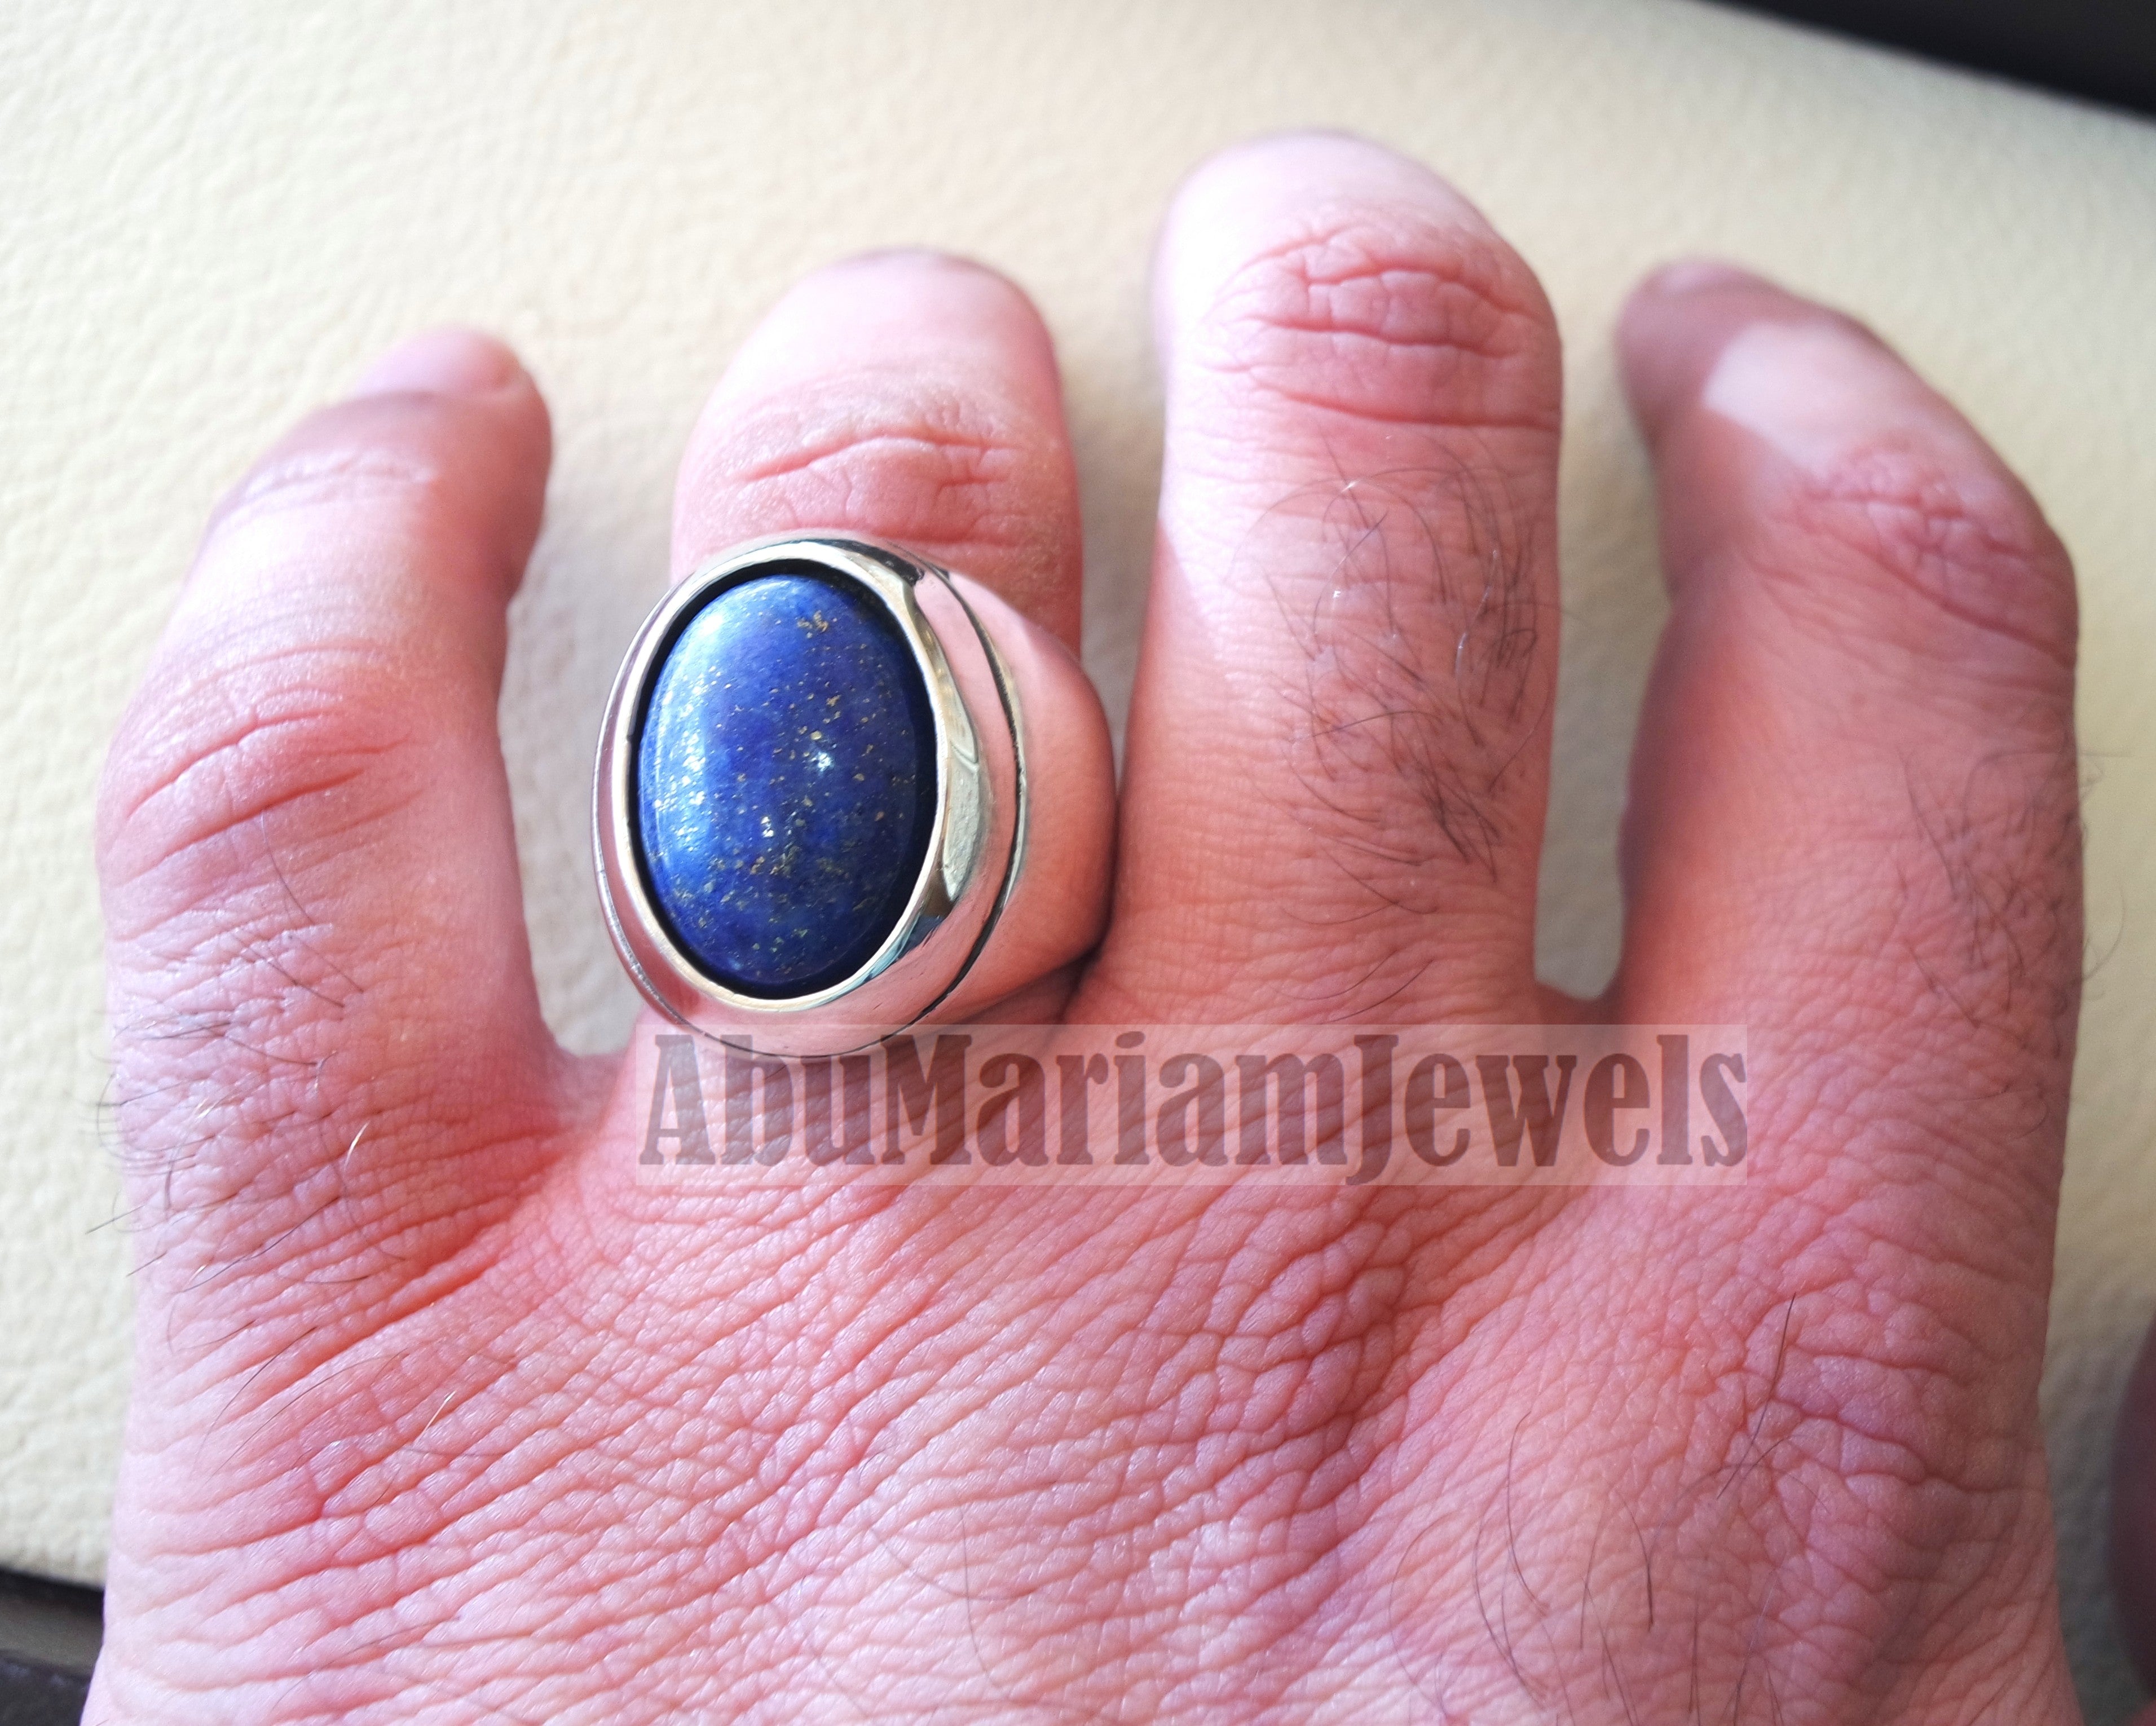 lapis lazuli oval cabochon natural blue stone heavy ring sterling silver 925 men jewelry all sizes 18 * 13 mm ottoman middle eastern